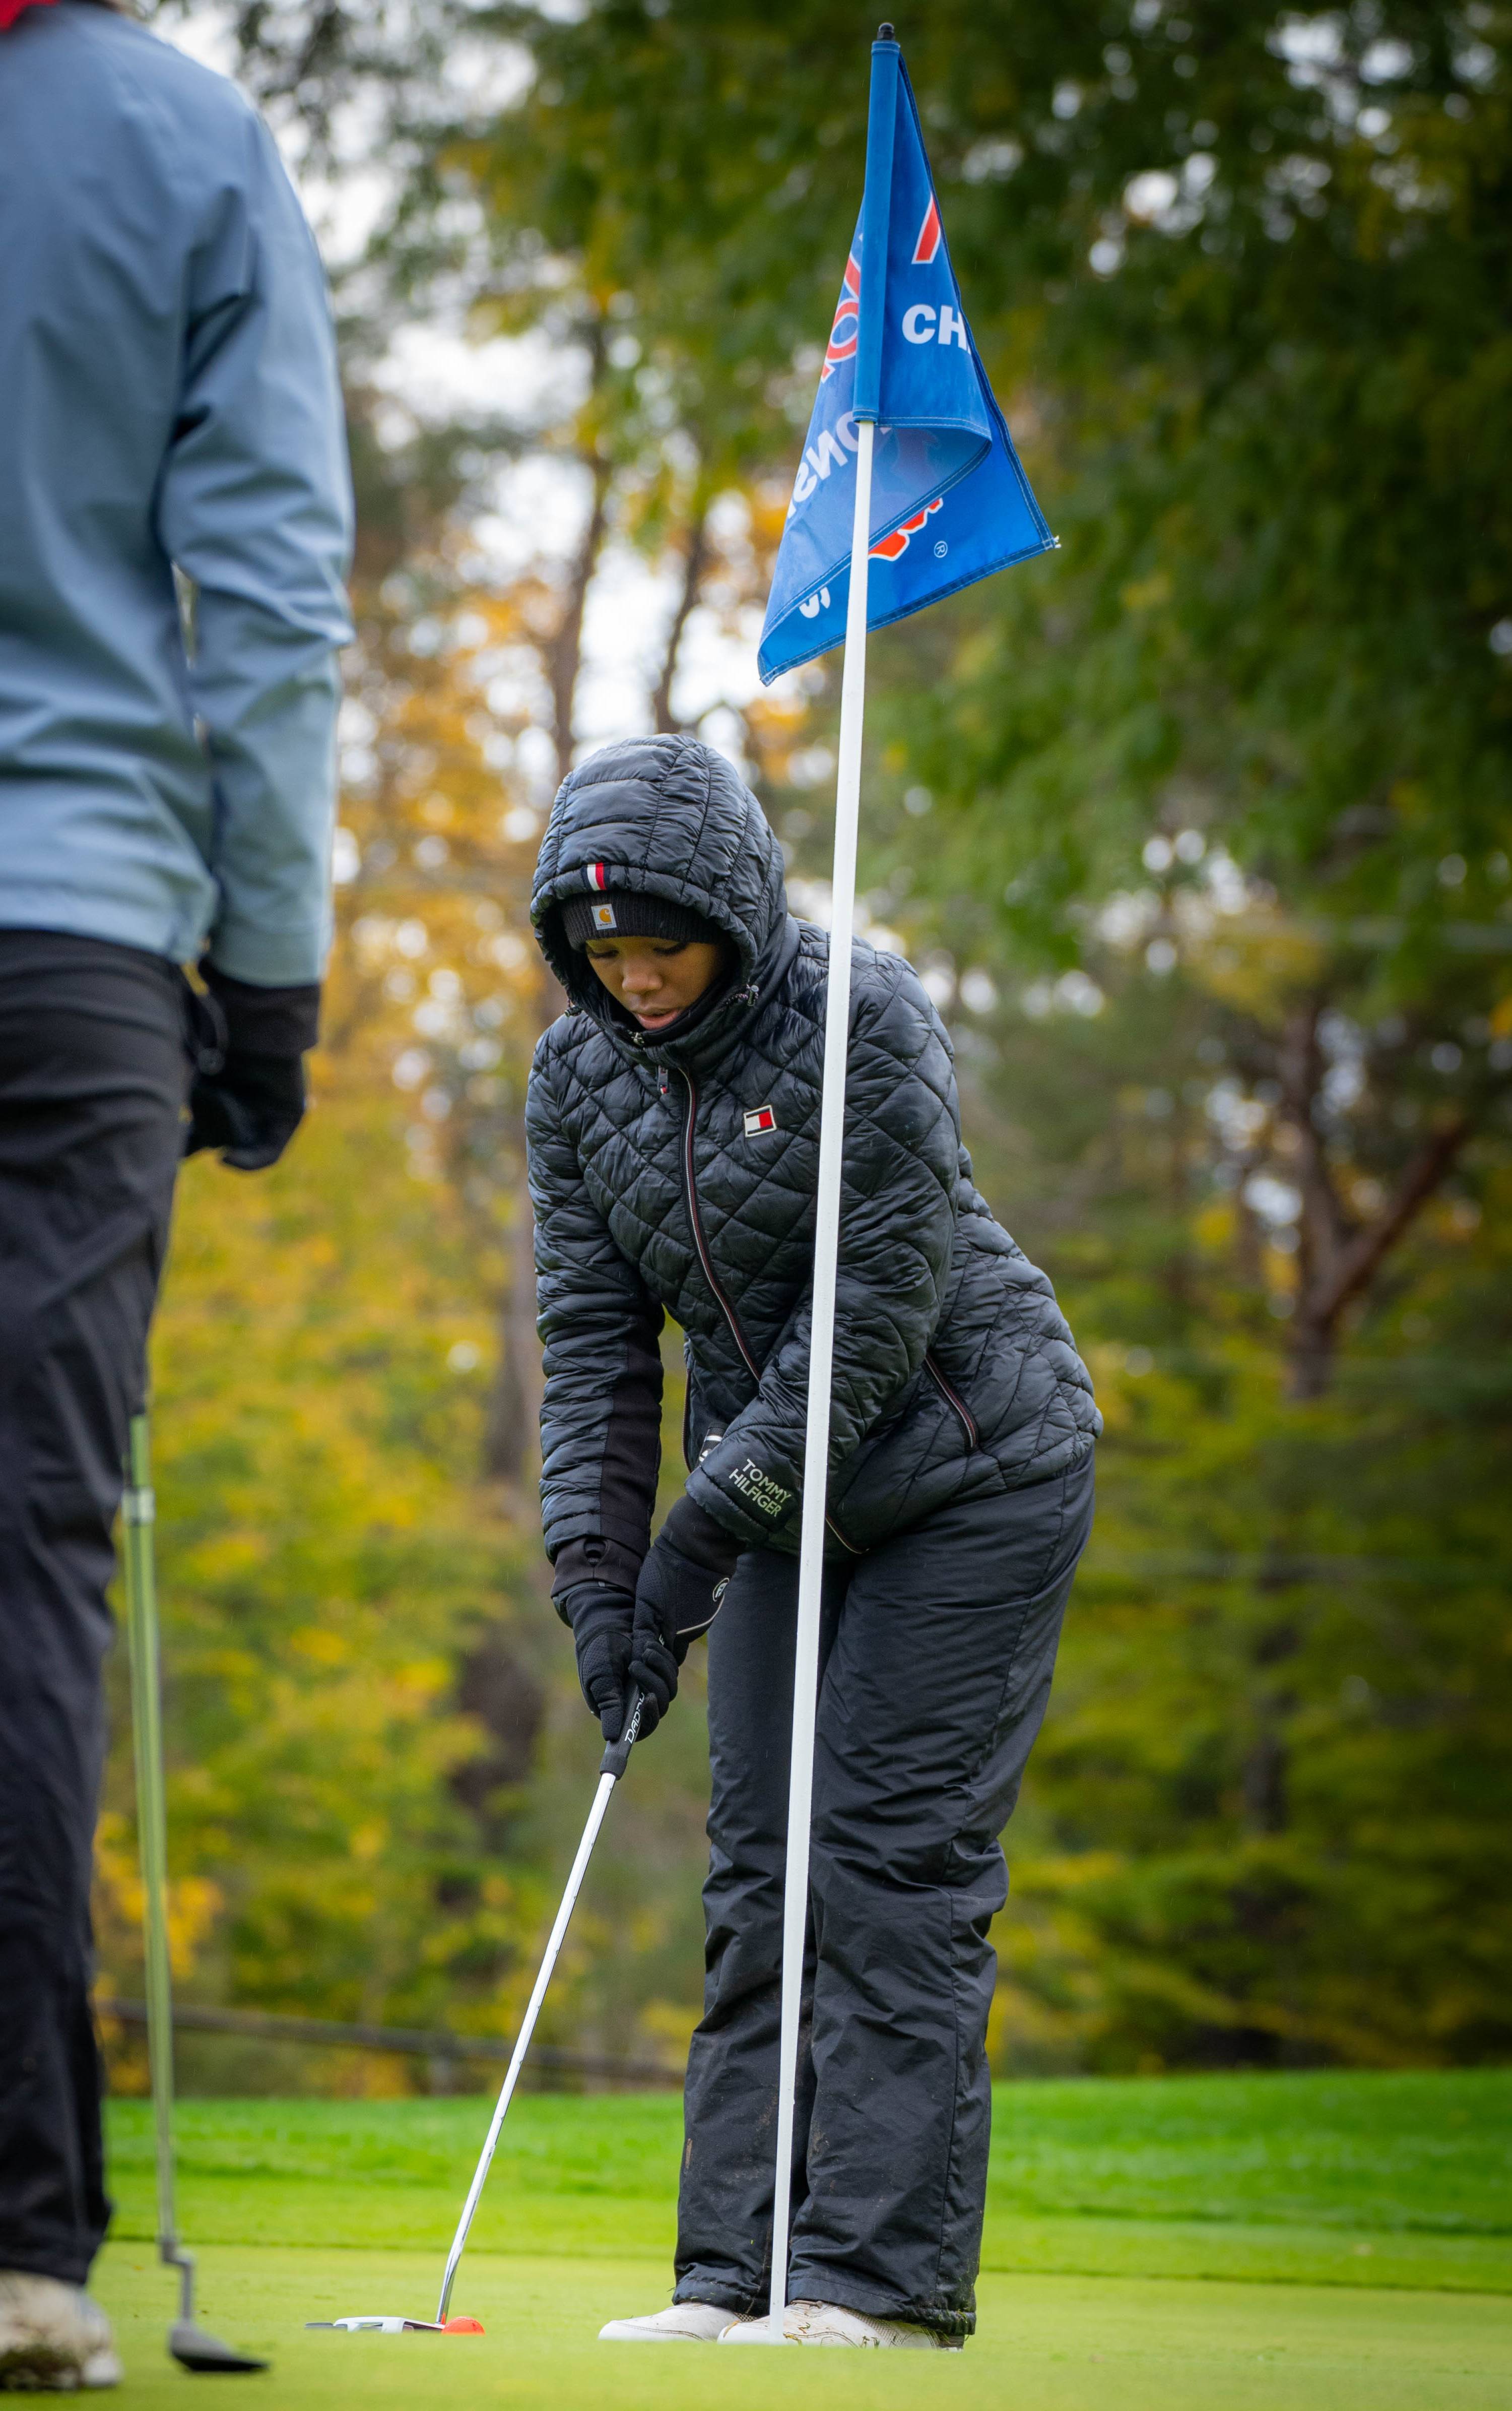 The Technicians' Nyla Joseph putts during the Final.